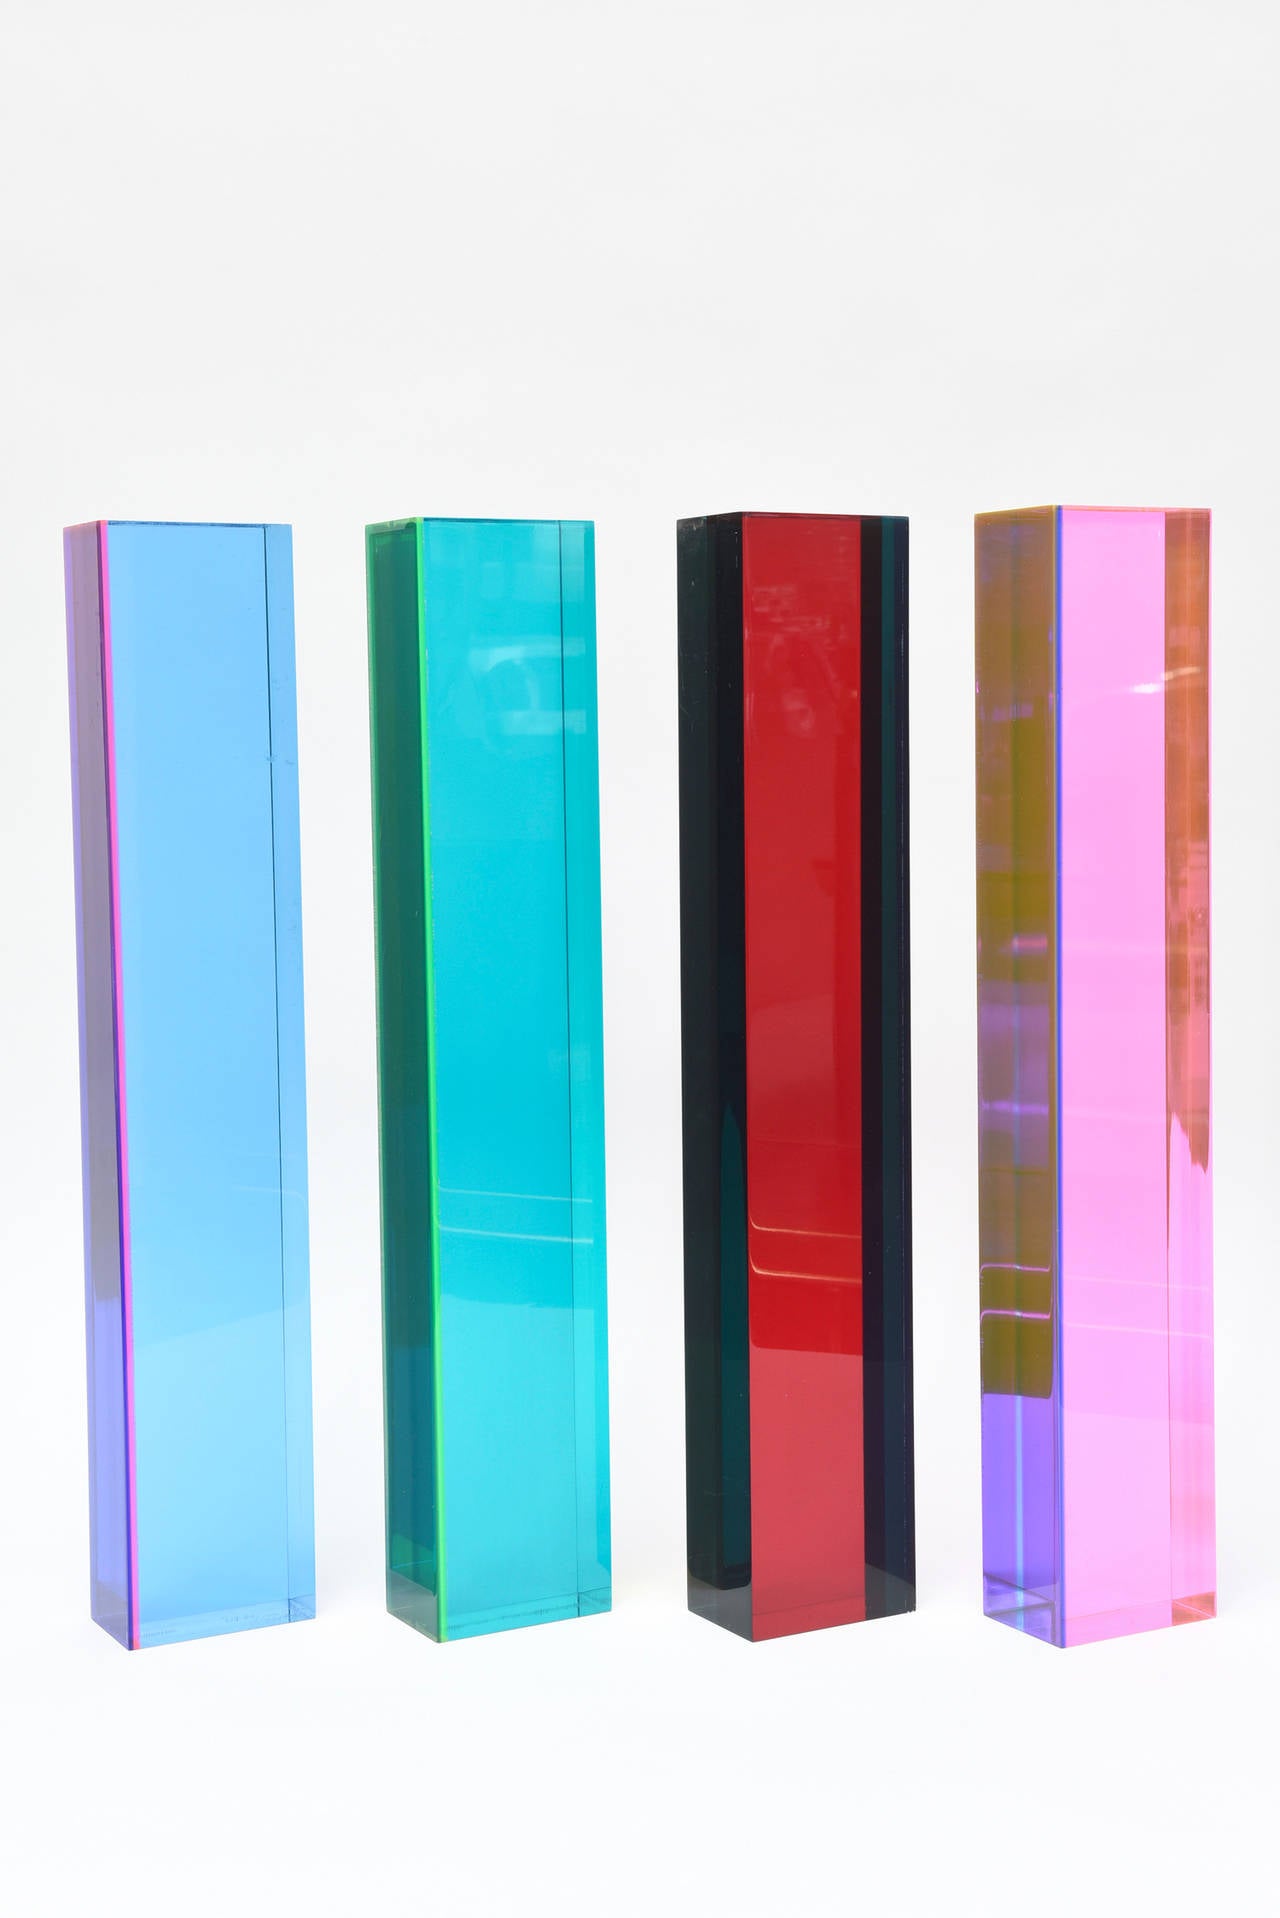 These amazing Mihuch Vasa tall lucite column sculptures; set of four, change with the play and direction of light and placement. They are signed #1156 Vasa 1977. Only one is signed and sold as a set only! The laminated intersecting planes of colored